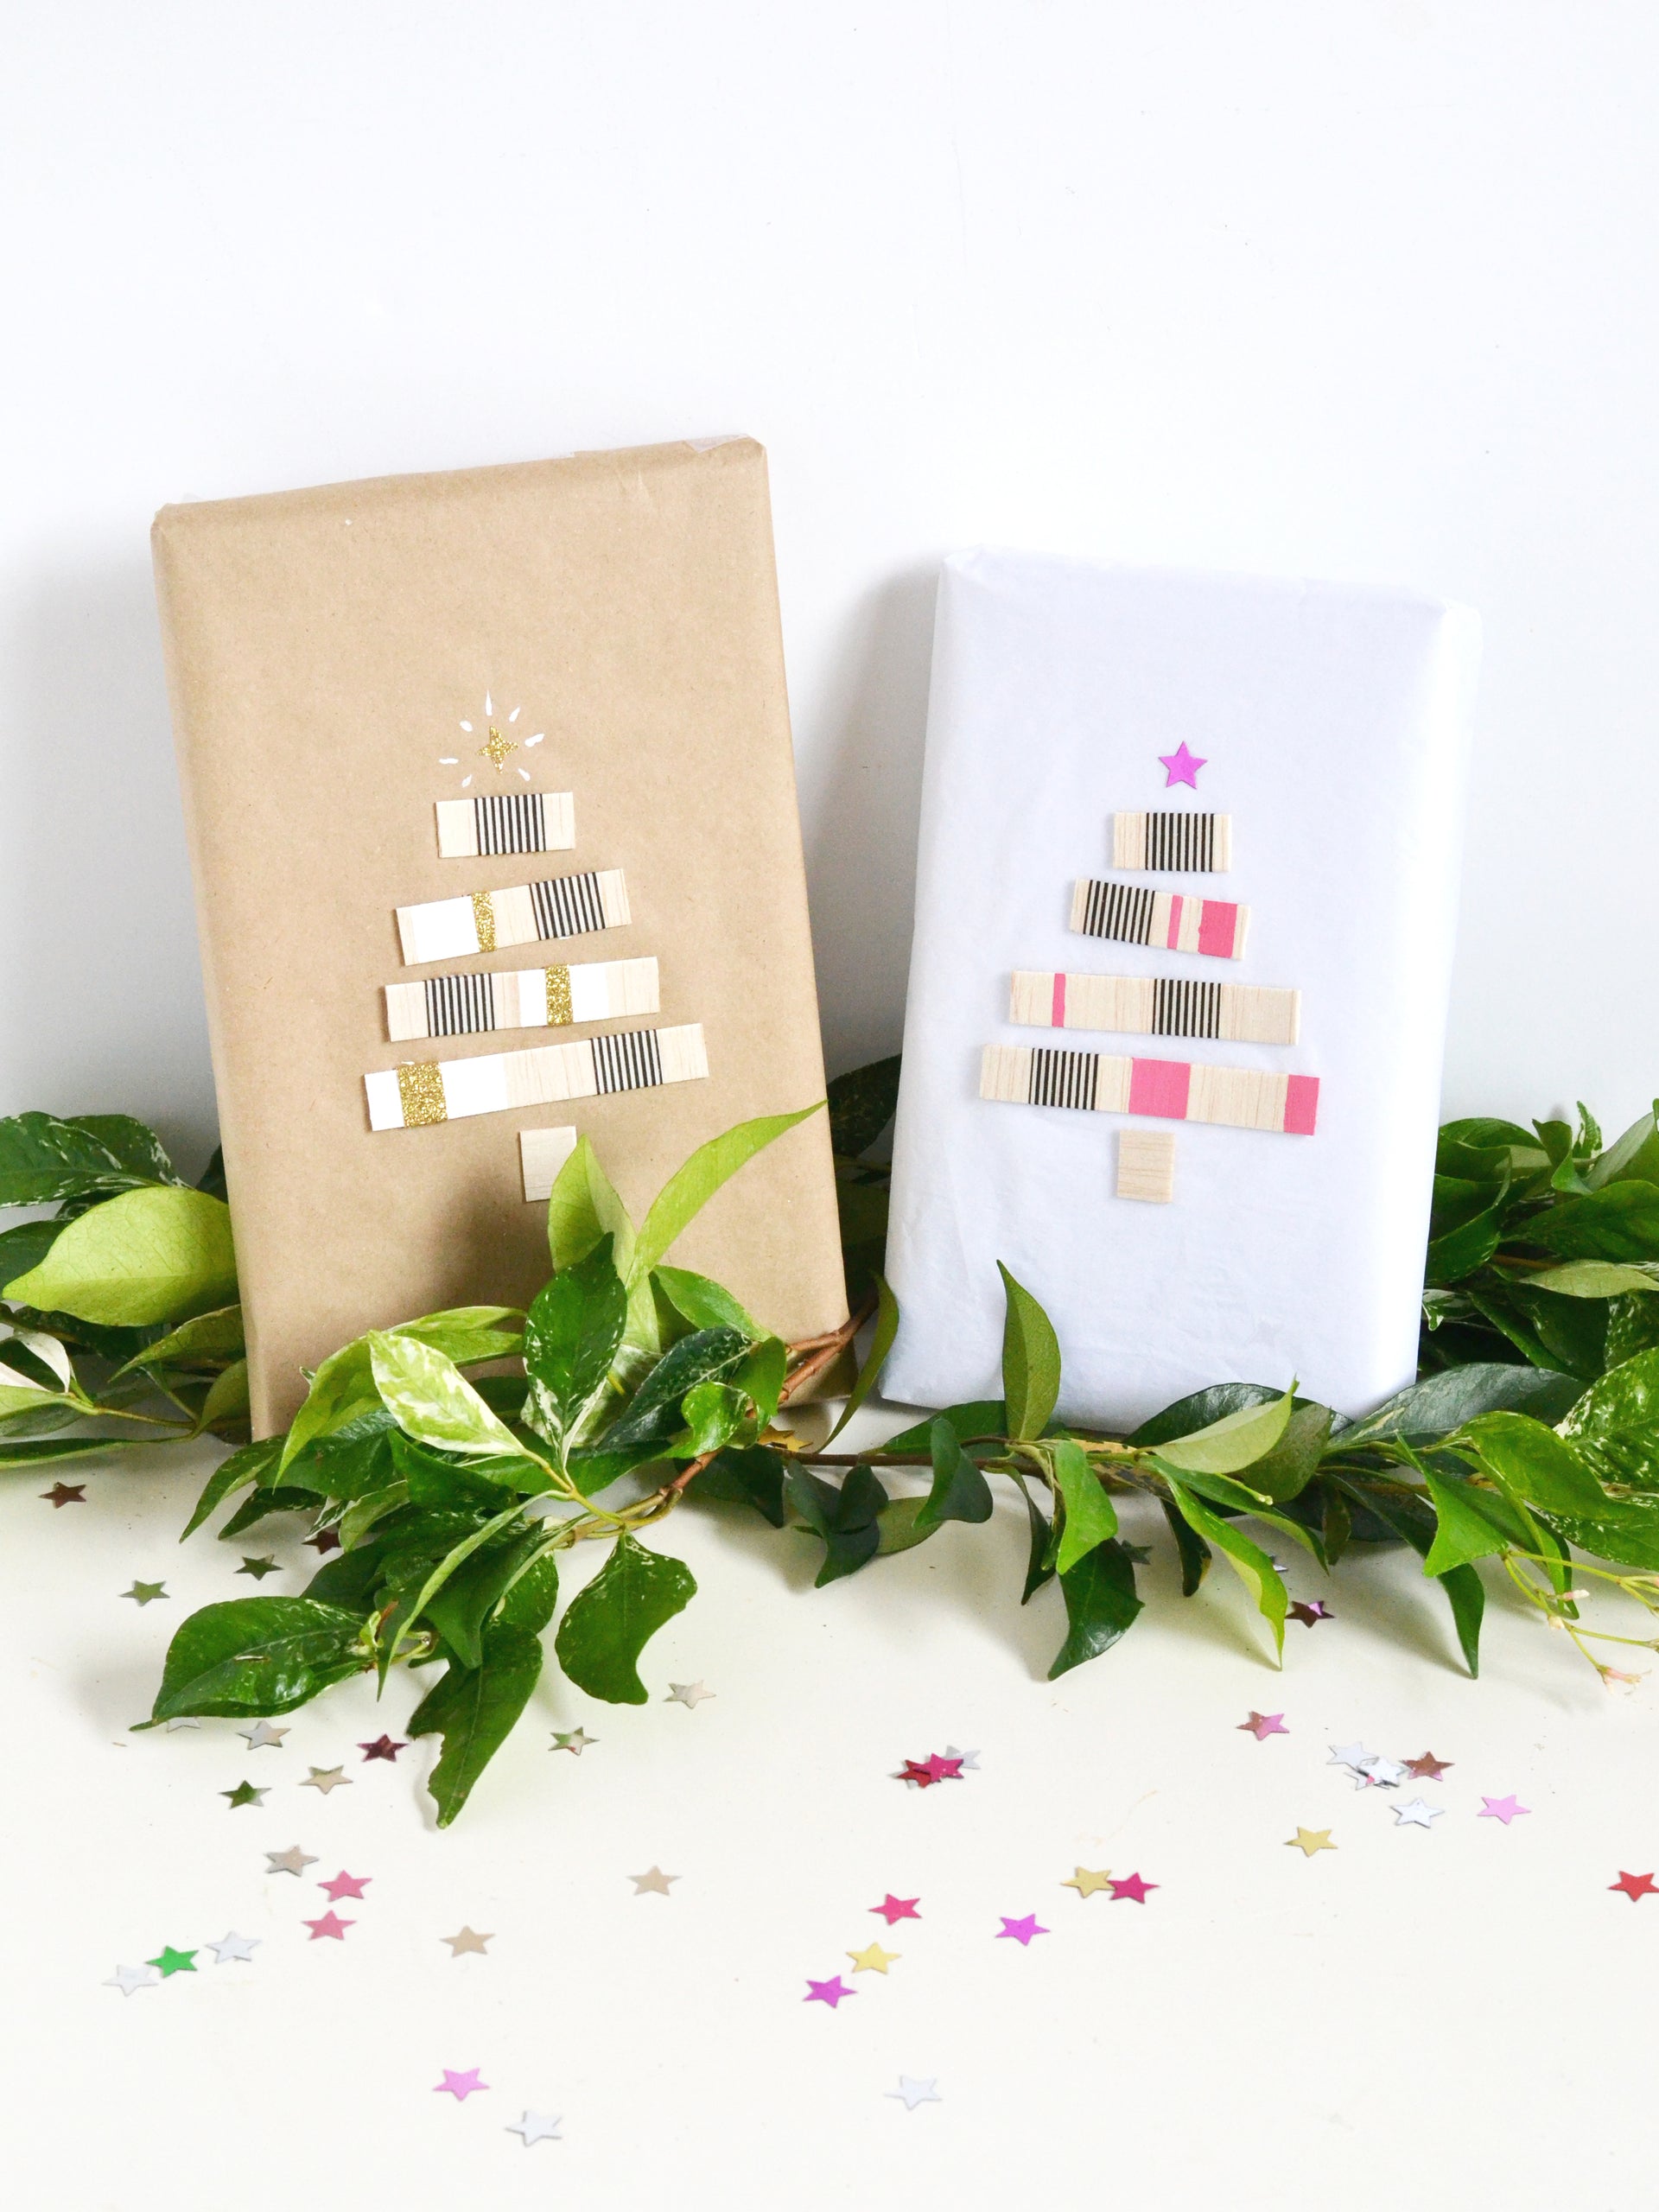 Green and Pink Christmas Gift Wrap Ideas - Persia Lou